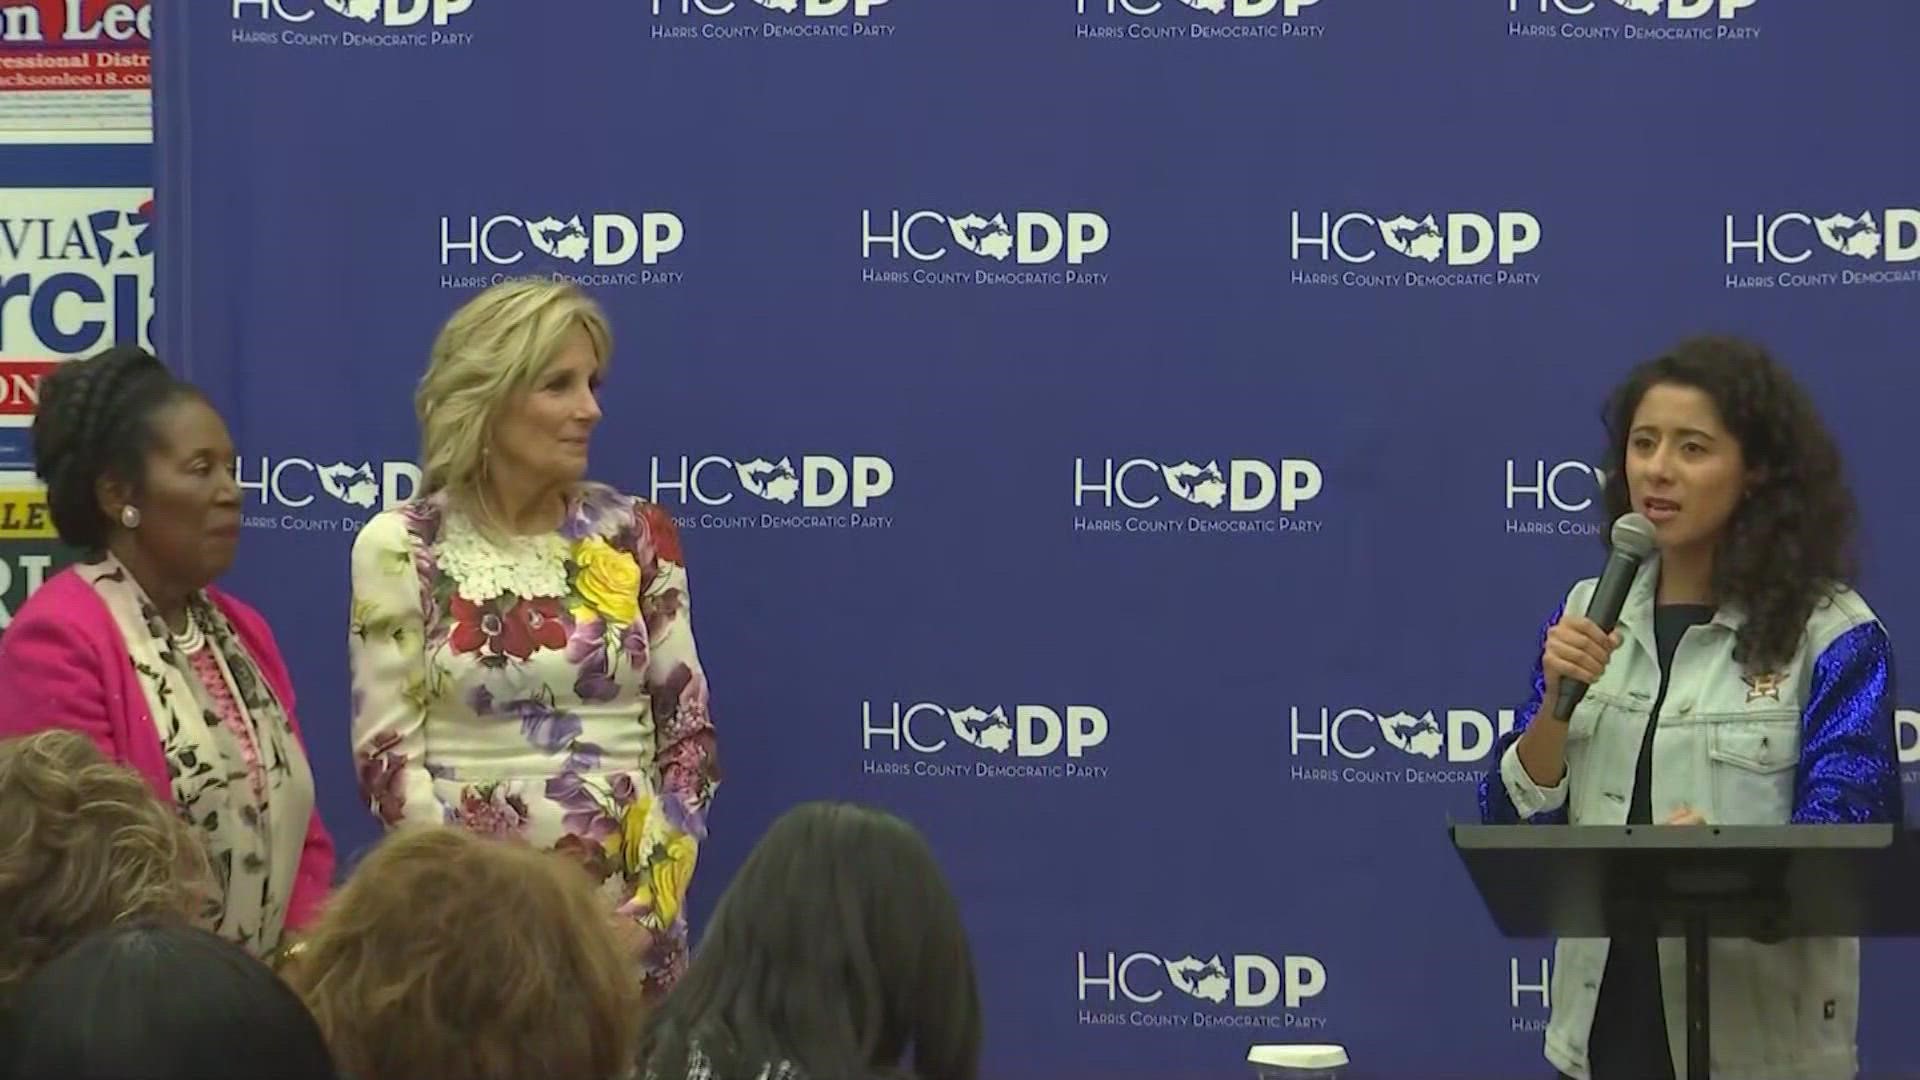 Harris County Judge Lina Hidalgo joined First Lady Dr. Jill Biden with a final push for Democrats to get voters to the polls.